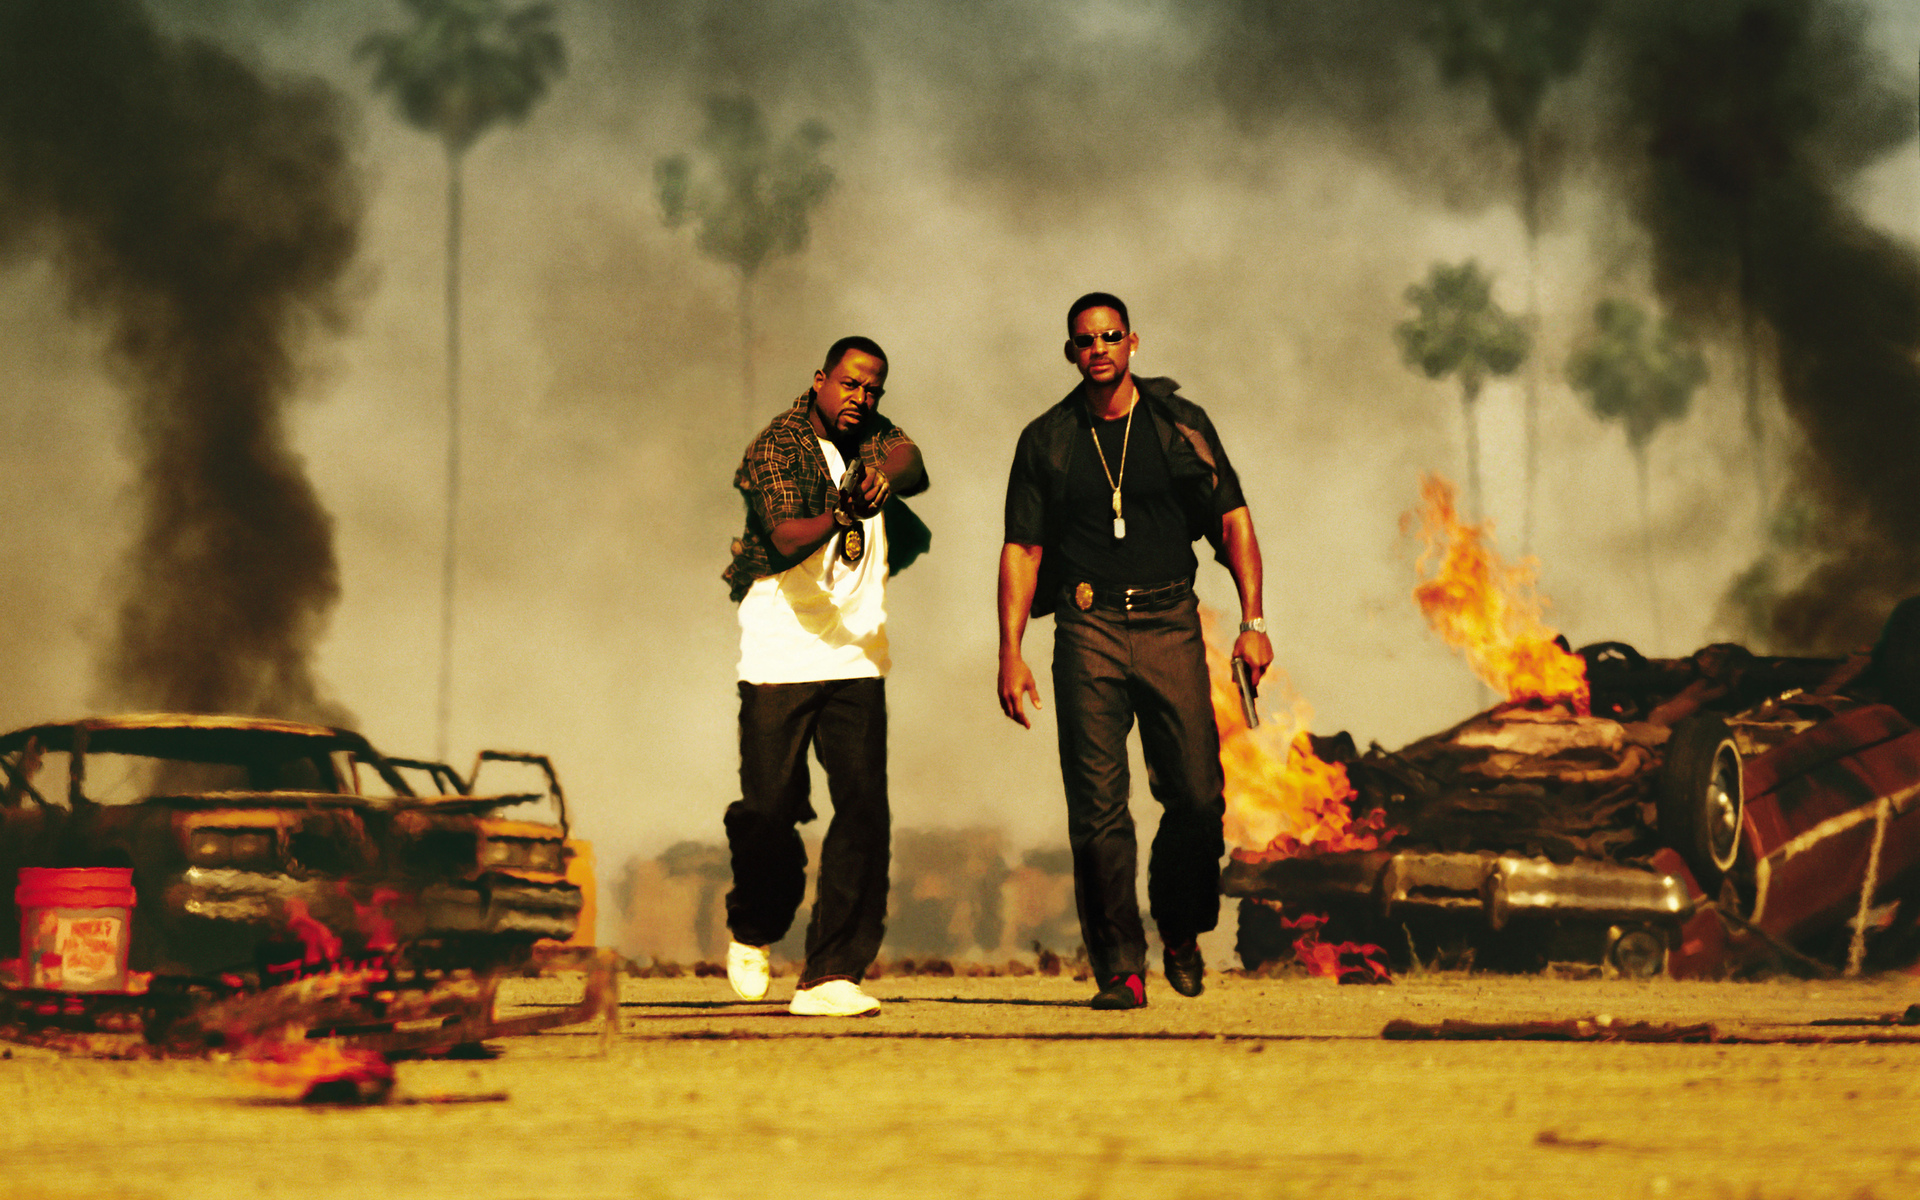 Download hd wallpapers of 27052-bad, Boys, 2, Explosion, Violence, Fire, Fl...